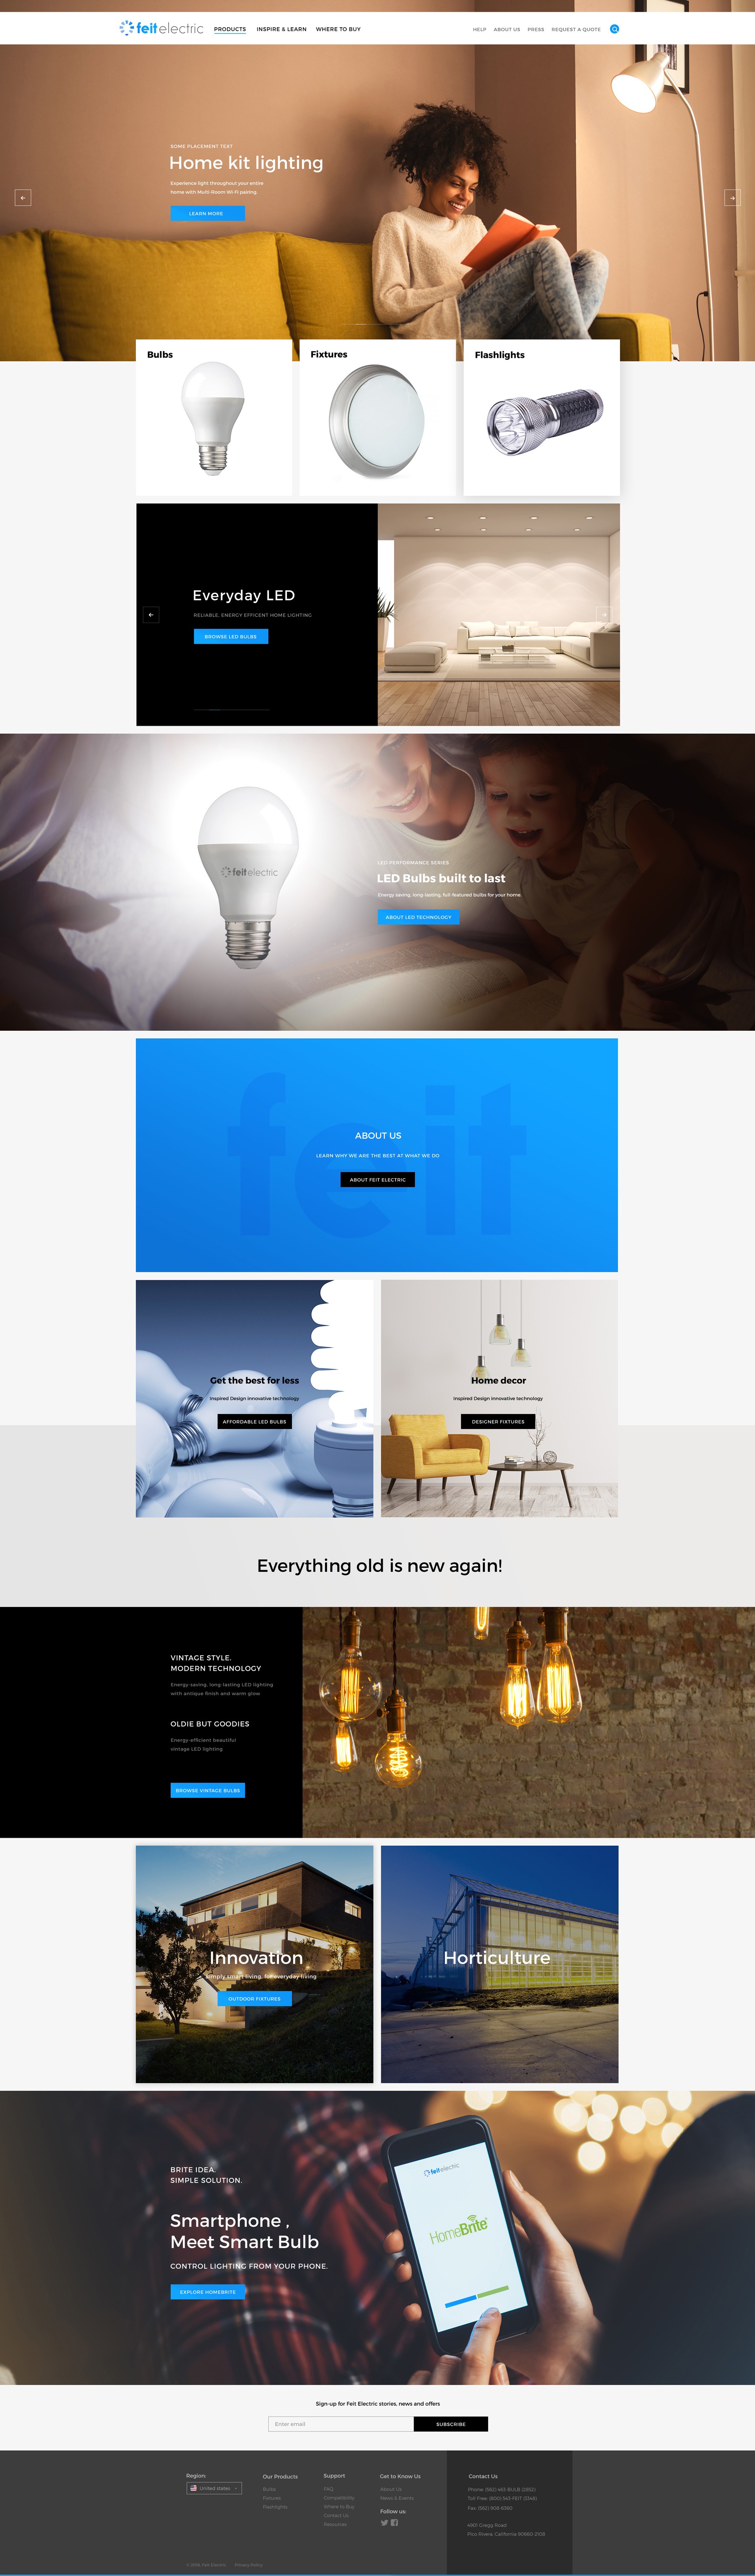 creative-website-design-projects-by-vrrb-feit